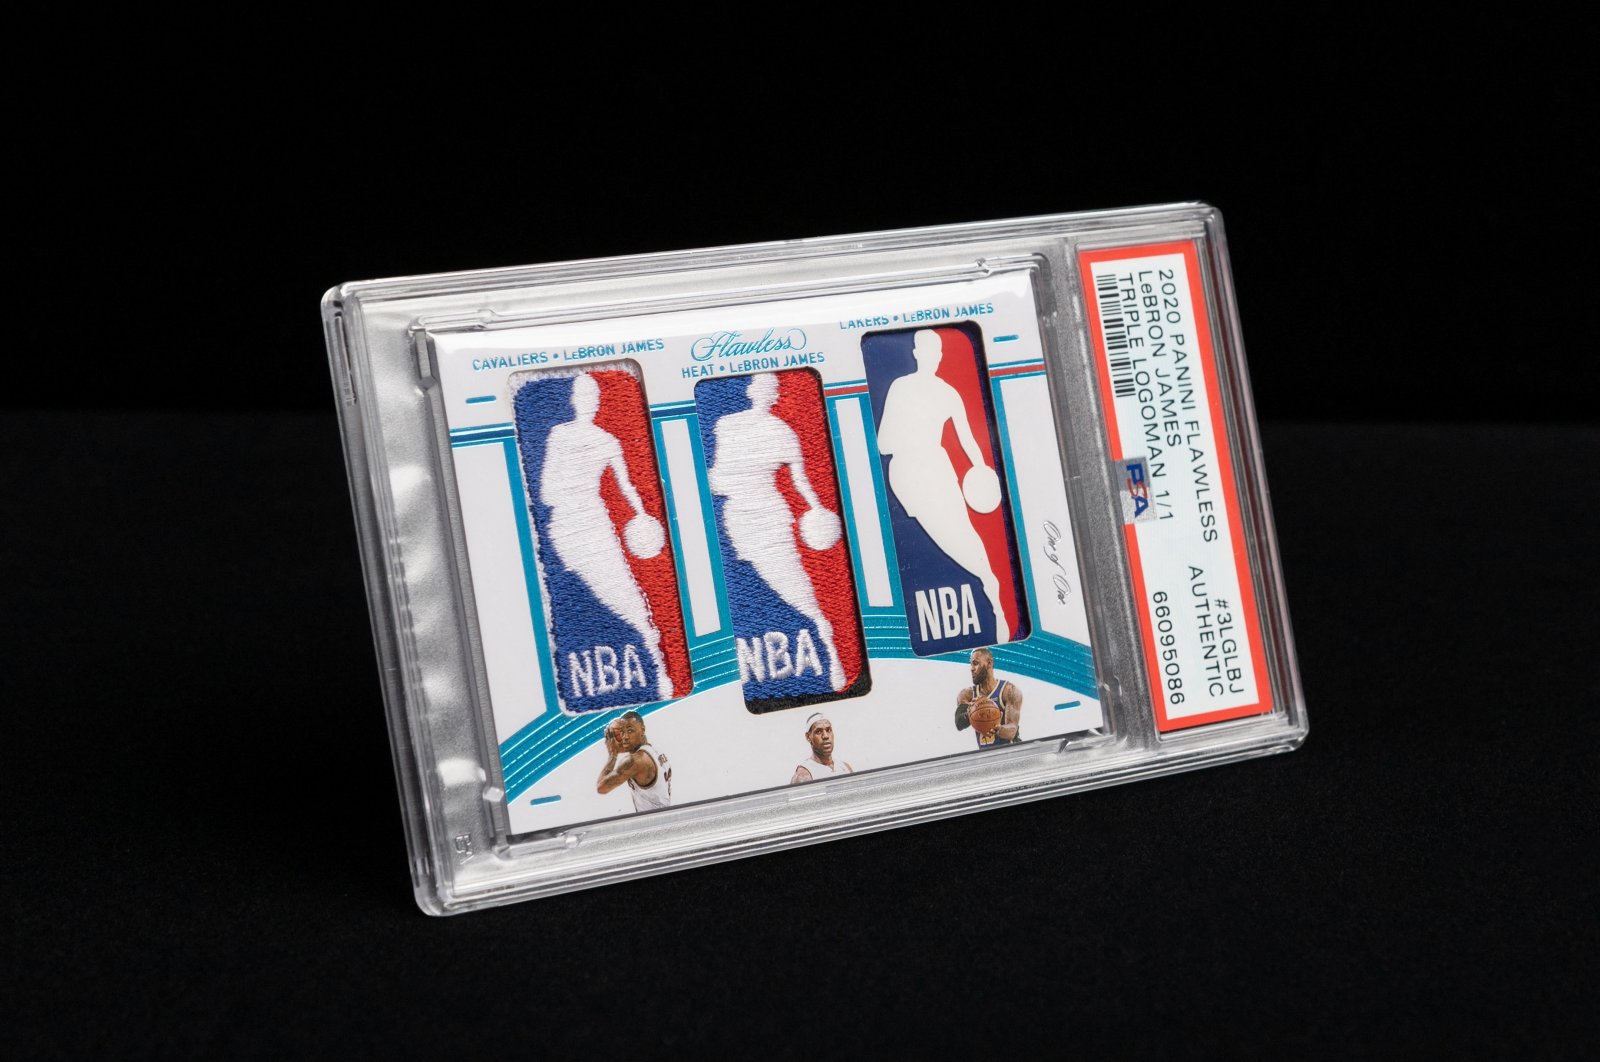 The "Triple Logoman" card, a single-issue card featuring the 18-time NBA All-Star LeBron James, including patches taken from jerseys he wore while with the Cleveland Cavaliers, Miami Heat and Los Angeles Lakers, is seen in this undated handout photo. (Reuters Photo)